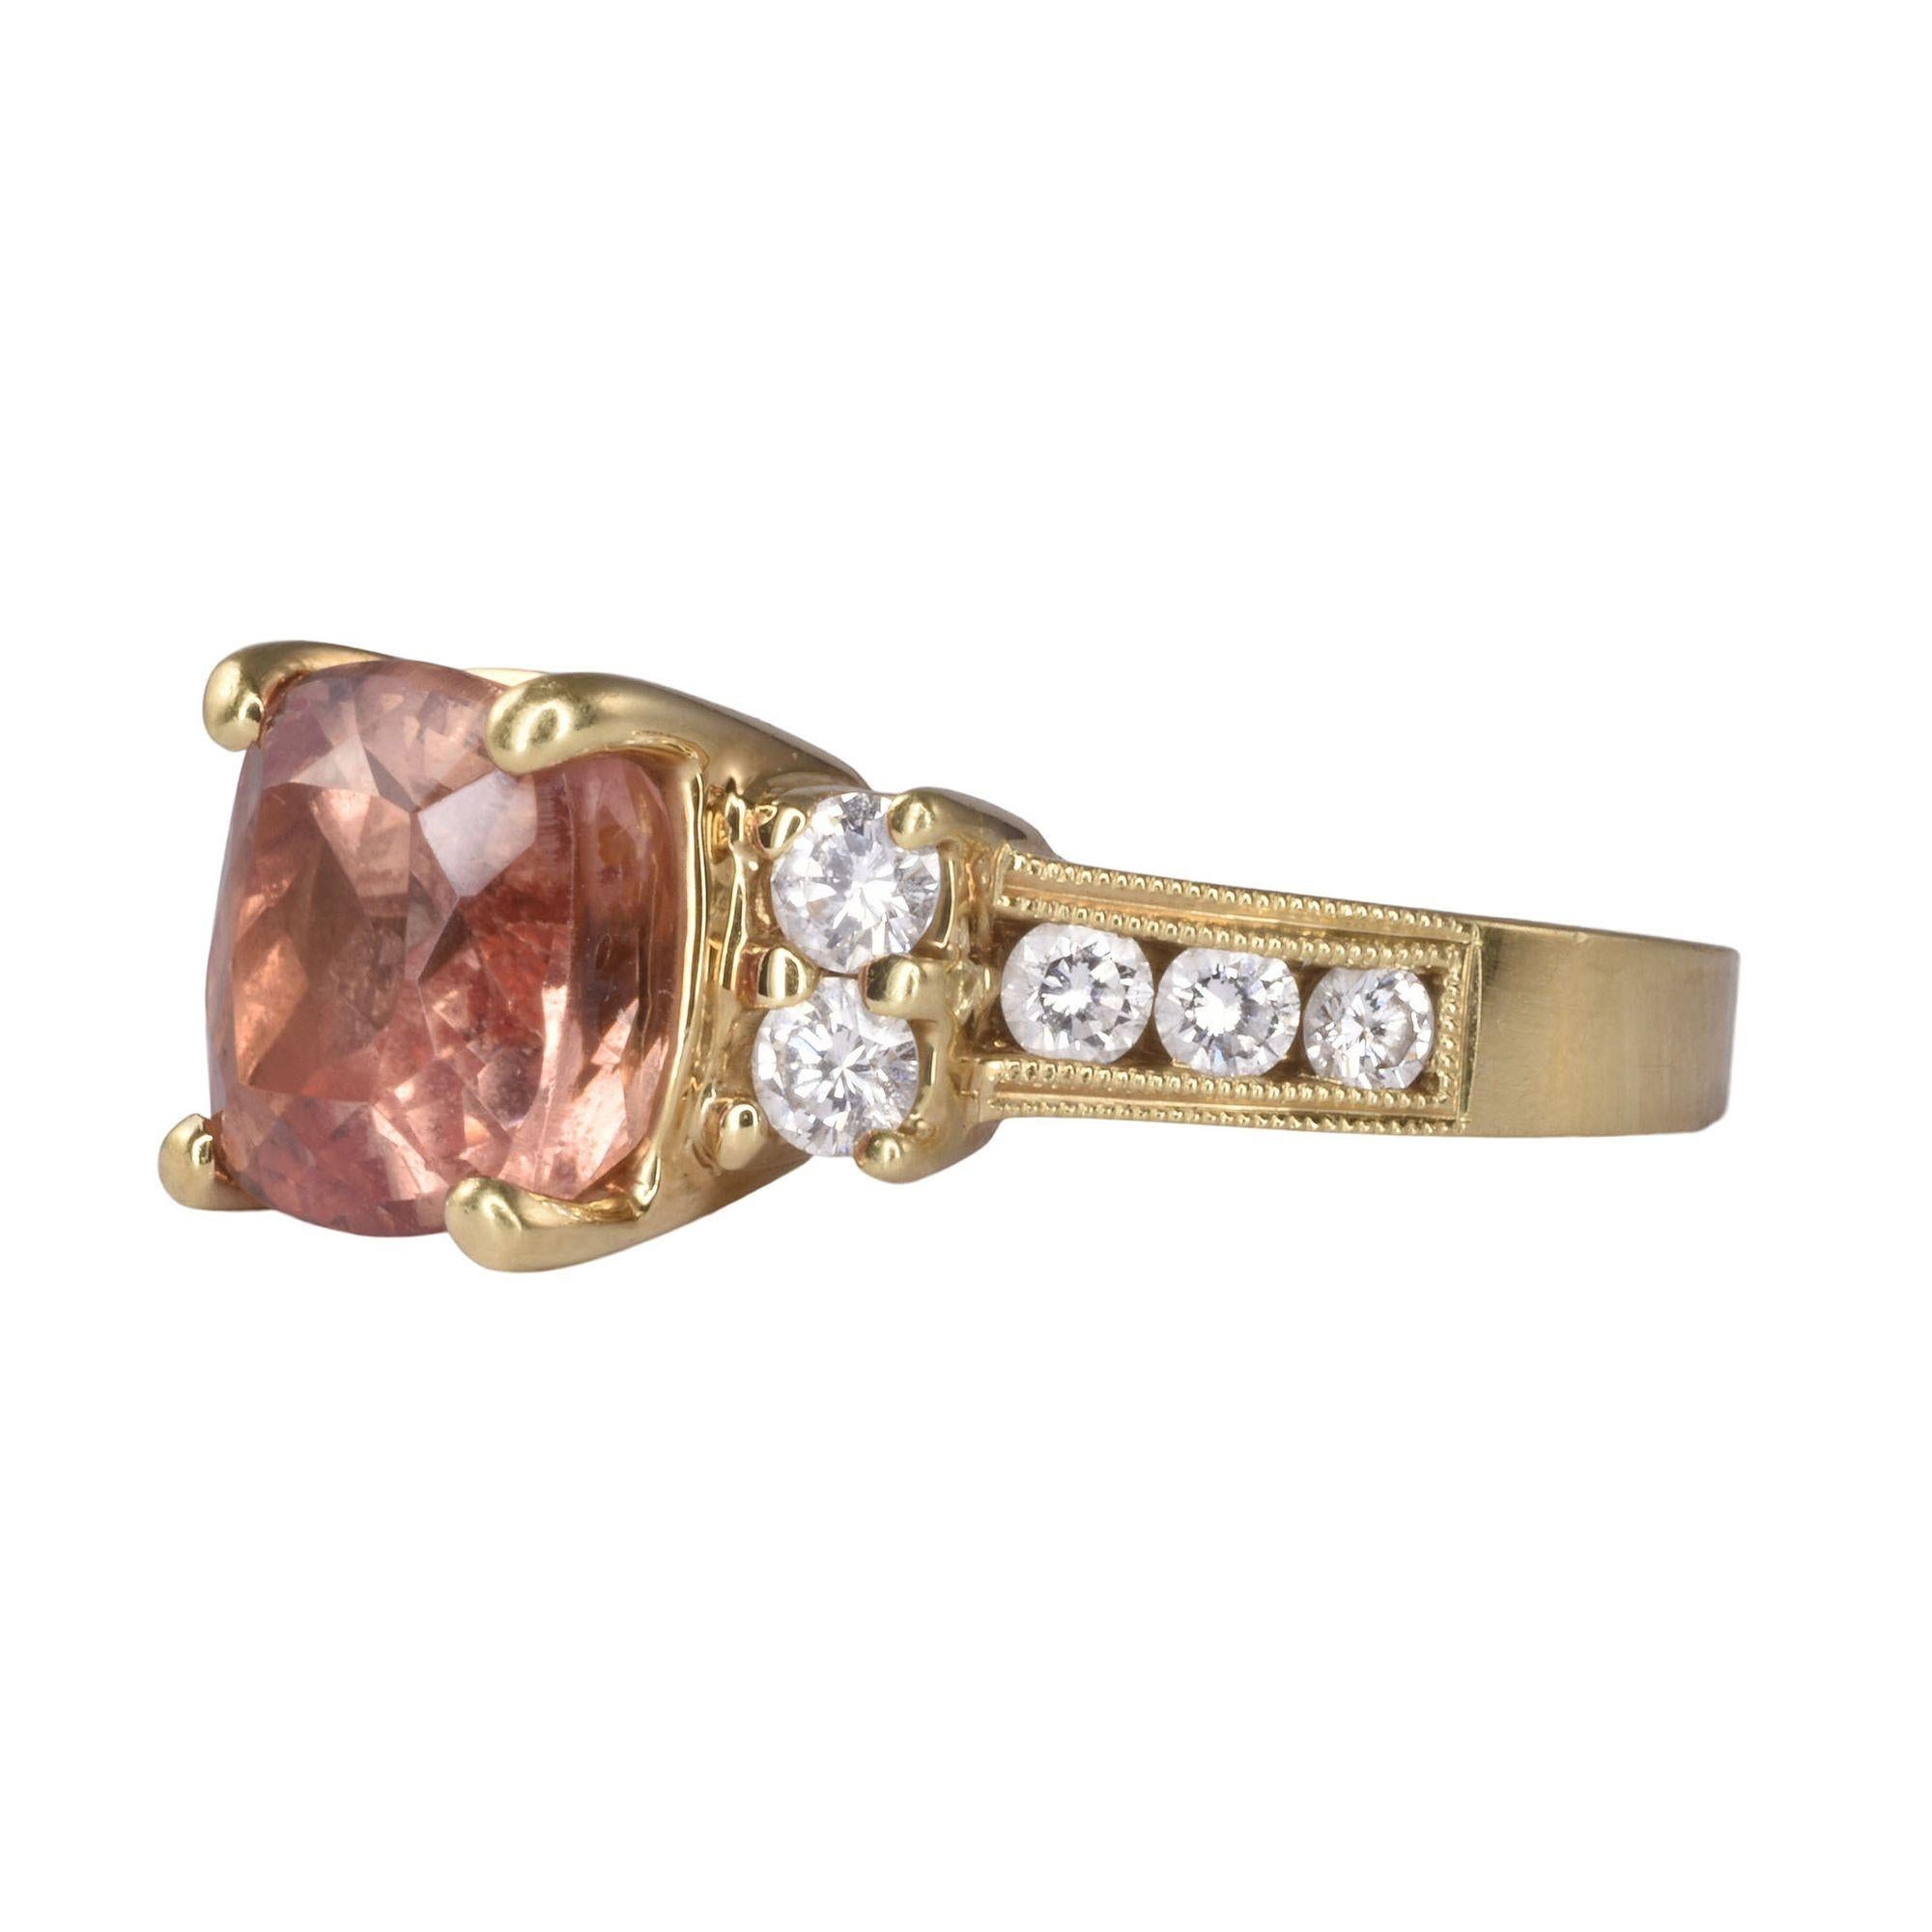 Estate imperial topaz 18K gold ring. This 18 karat yellow gold ring features a 2.85 carat imperial topaz that is accented with .40 carat total weight of diamonds. The diamonds have VS clarity and G-H color. This imperial topaz ring is a size 6.25.